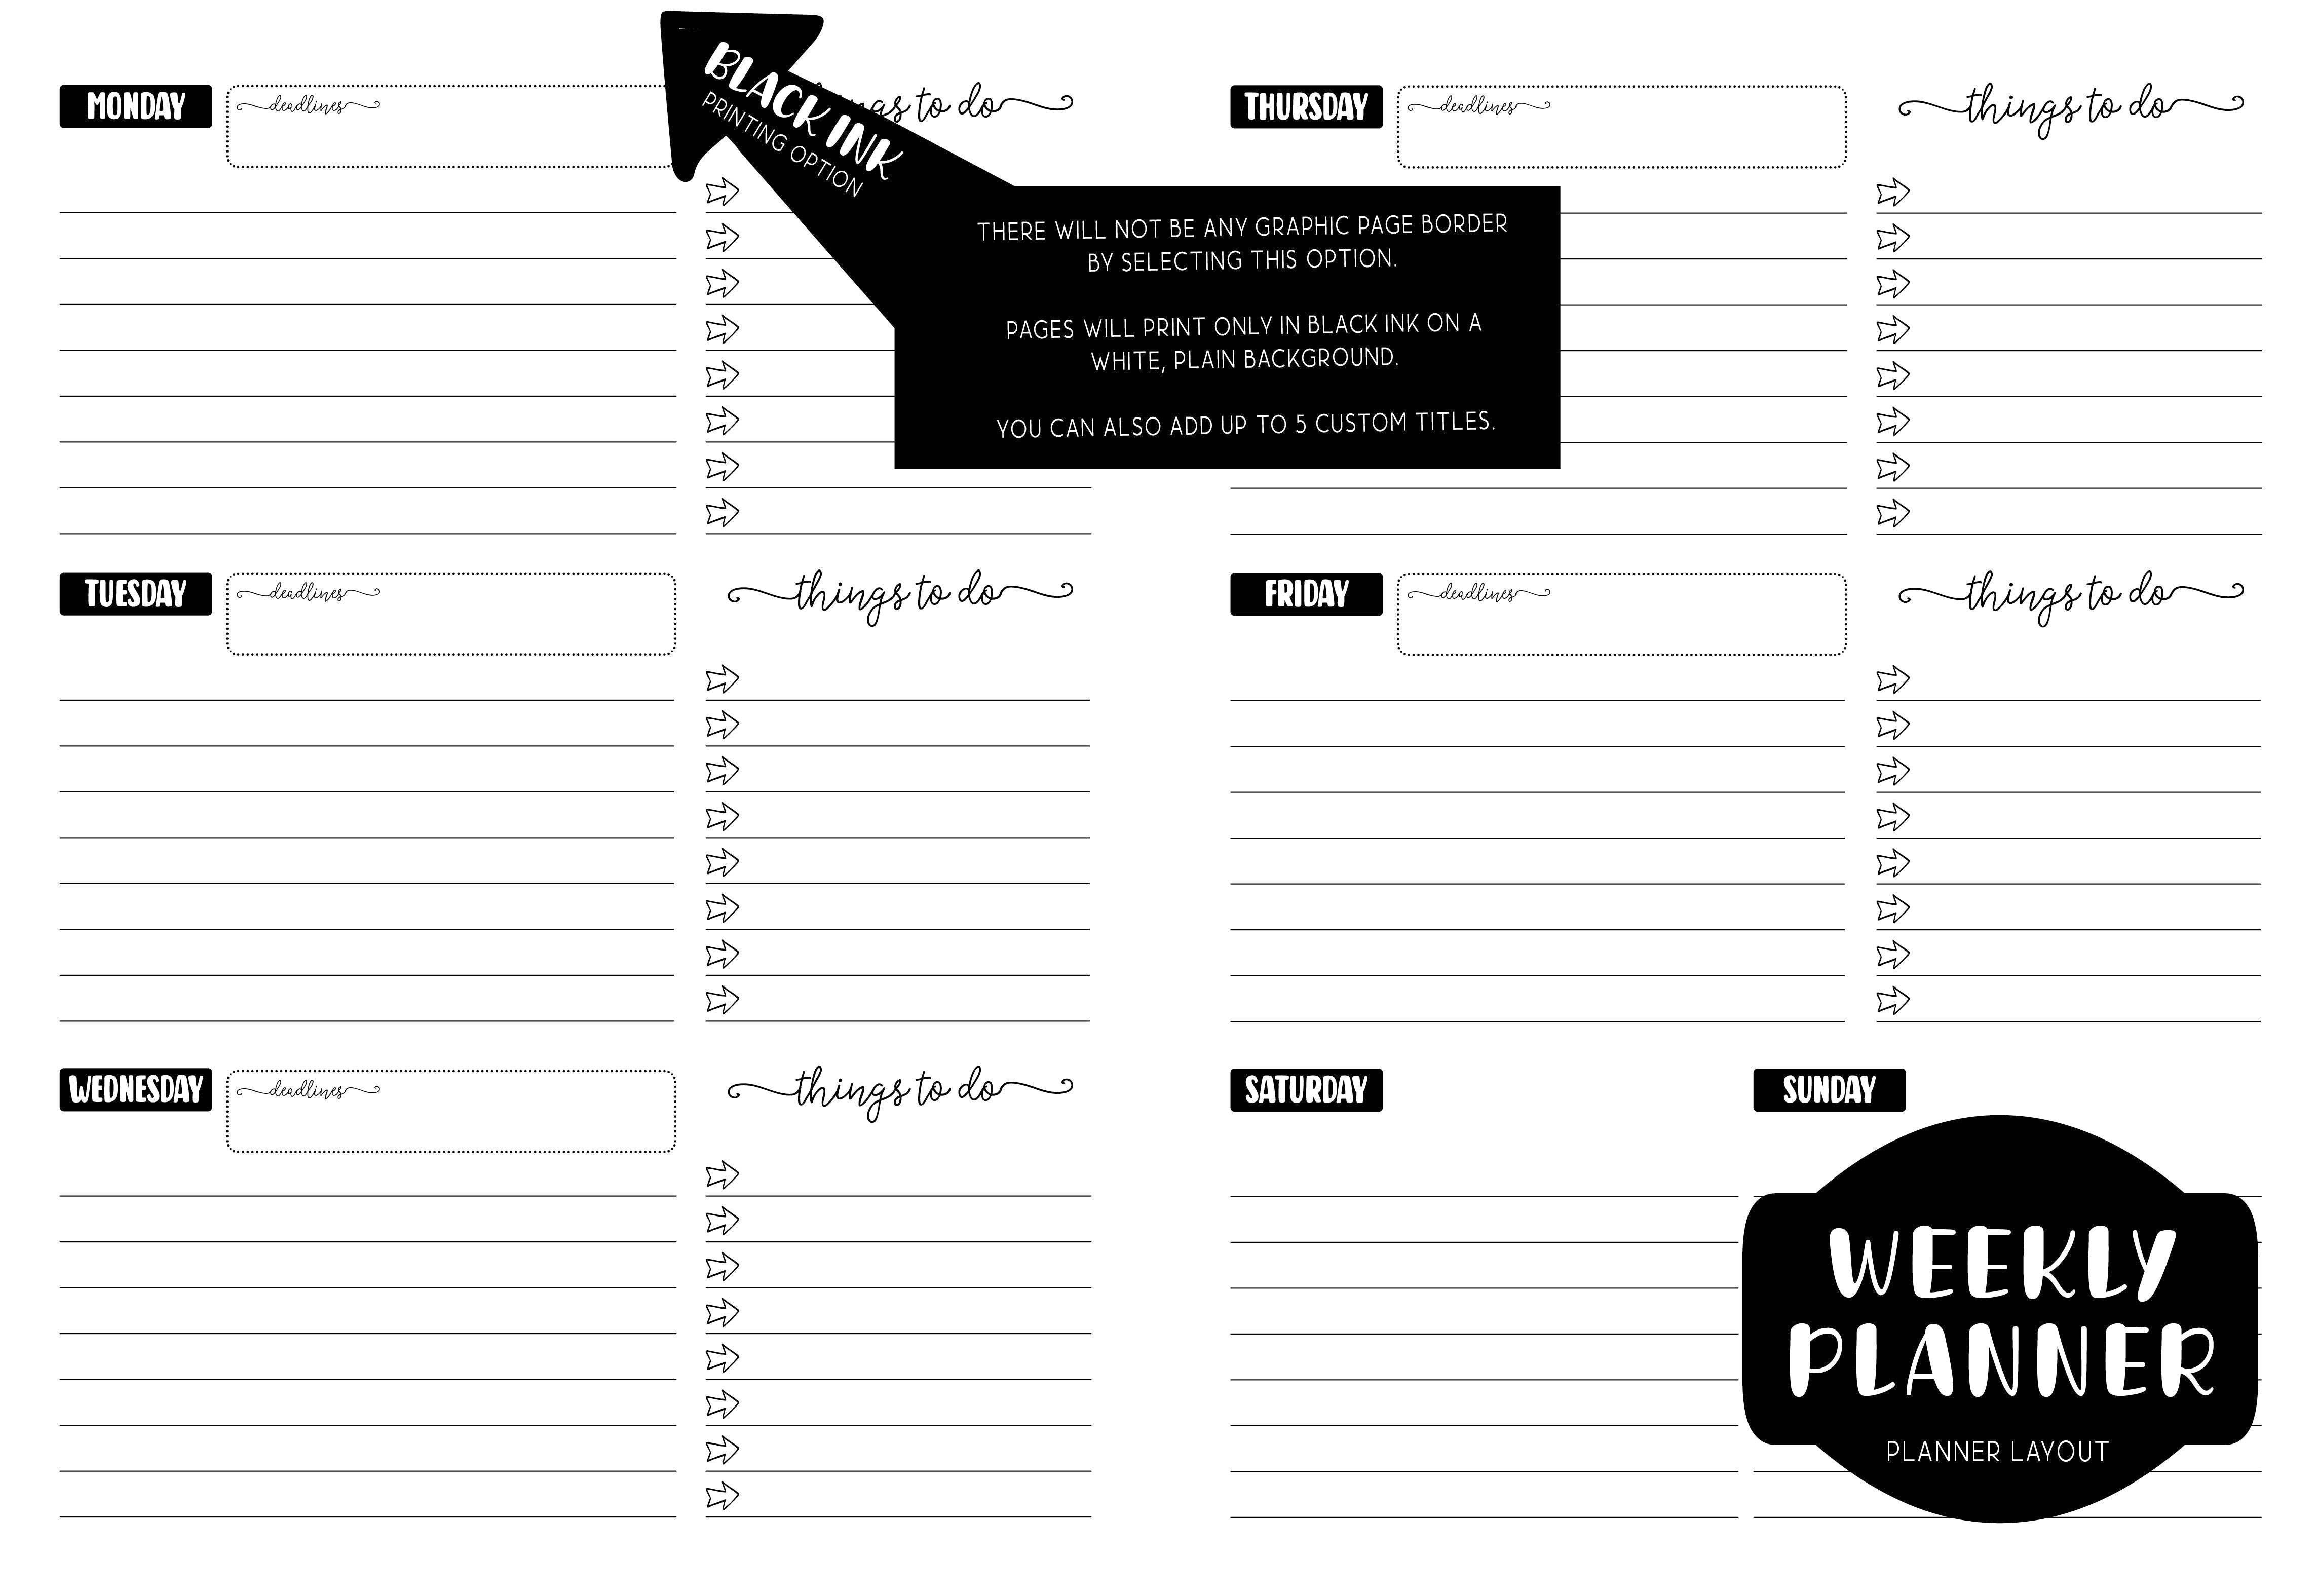 Weekly Planner - BOHO ABSTRACT 2